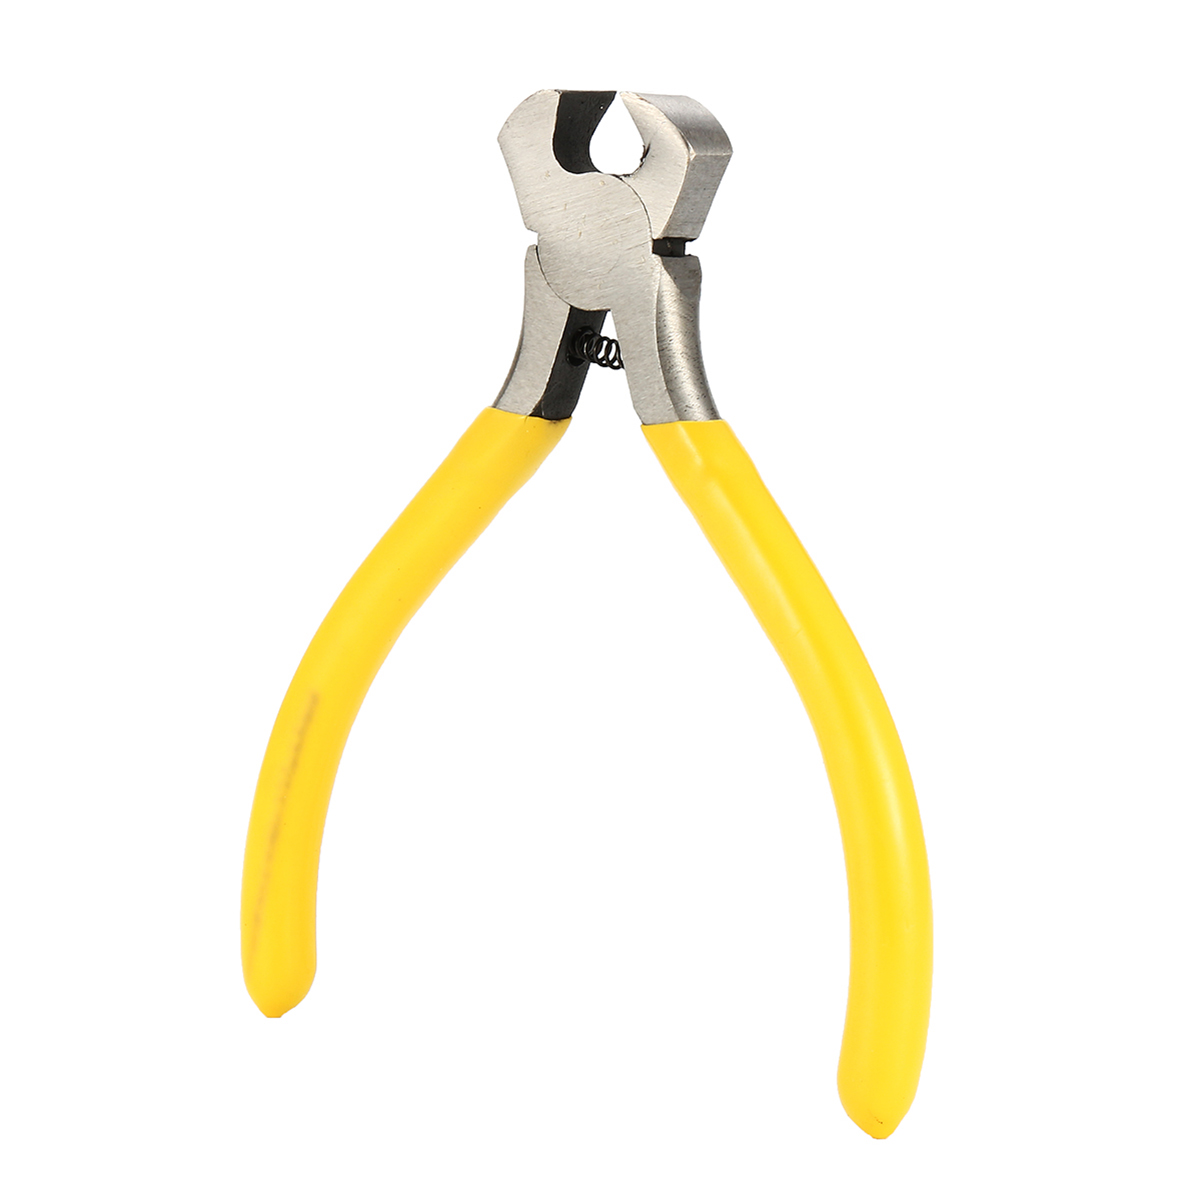 Guitar-Parts-Professional-Fret-Puller-Removal-Plier-Guitar-Bass-Repair-Tool-String-Pliers-Tool-1368383-3